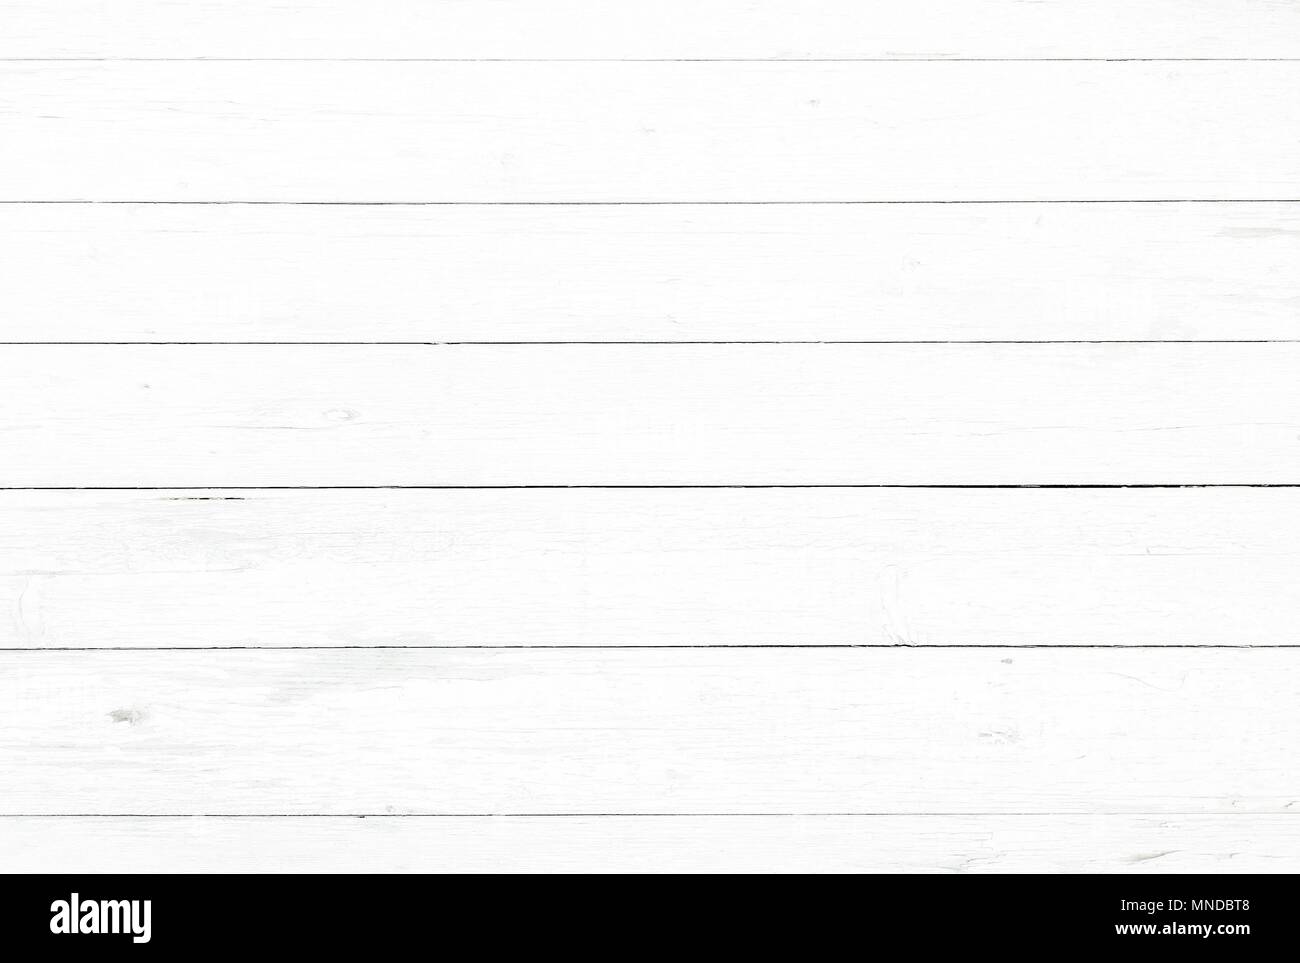 wood texture background, light oak of weathered distressed rustic wooden with faded varnish paint showing woodgrain texture. hardwood white planks pat Stock Photo